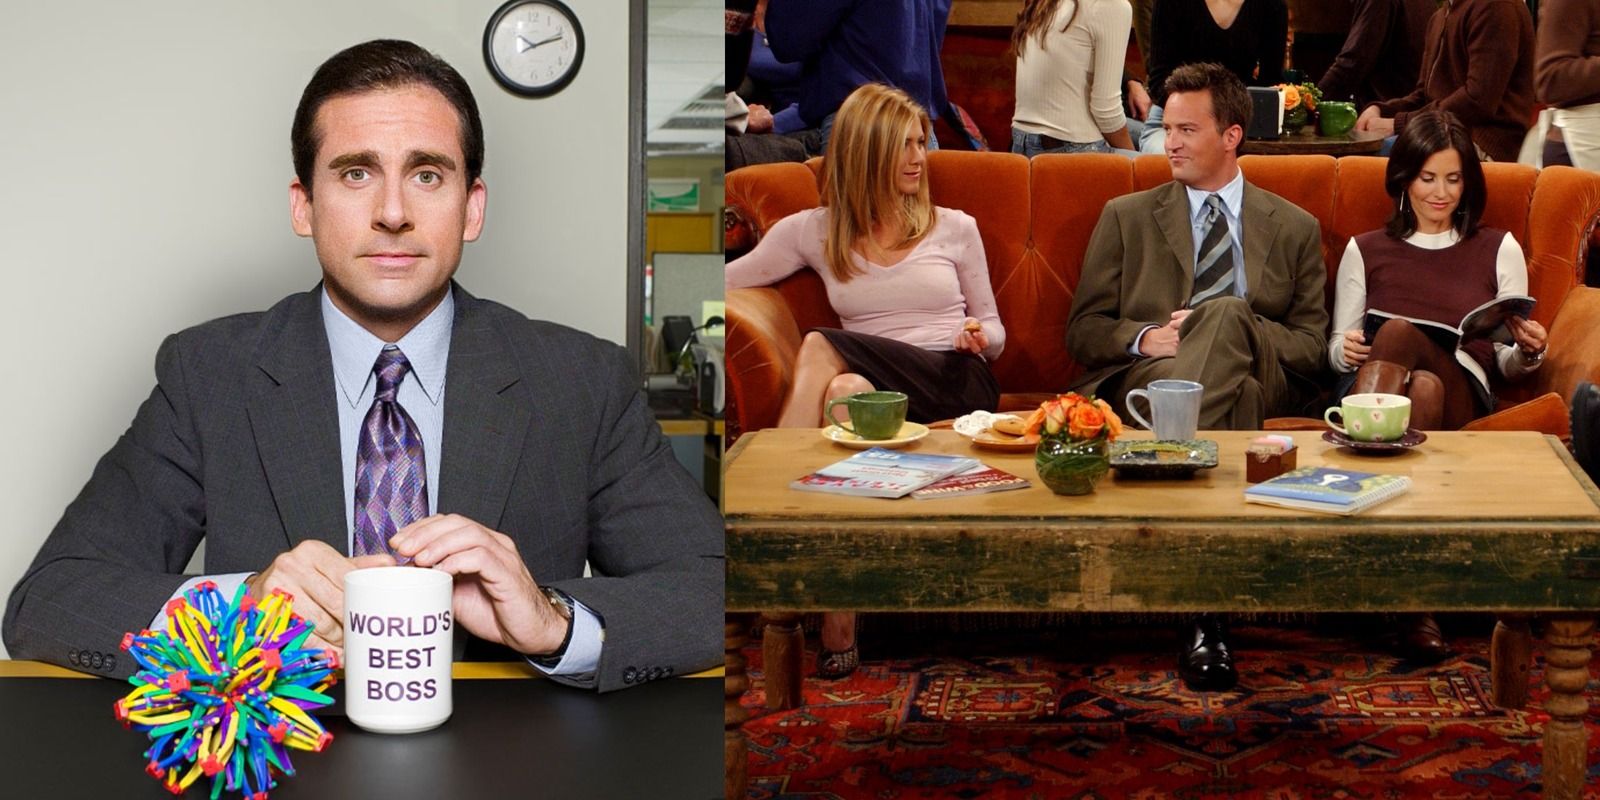 Two images from The Office and Central Perk in Friends